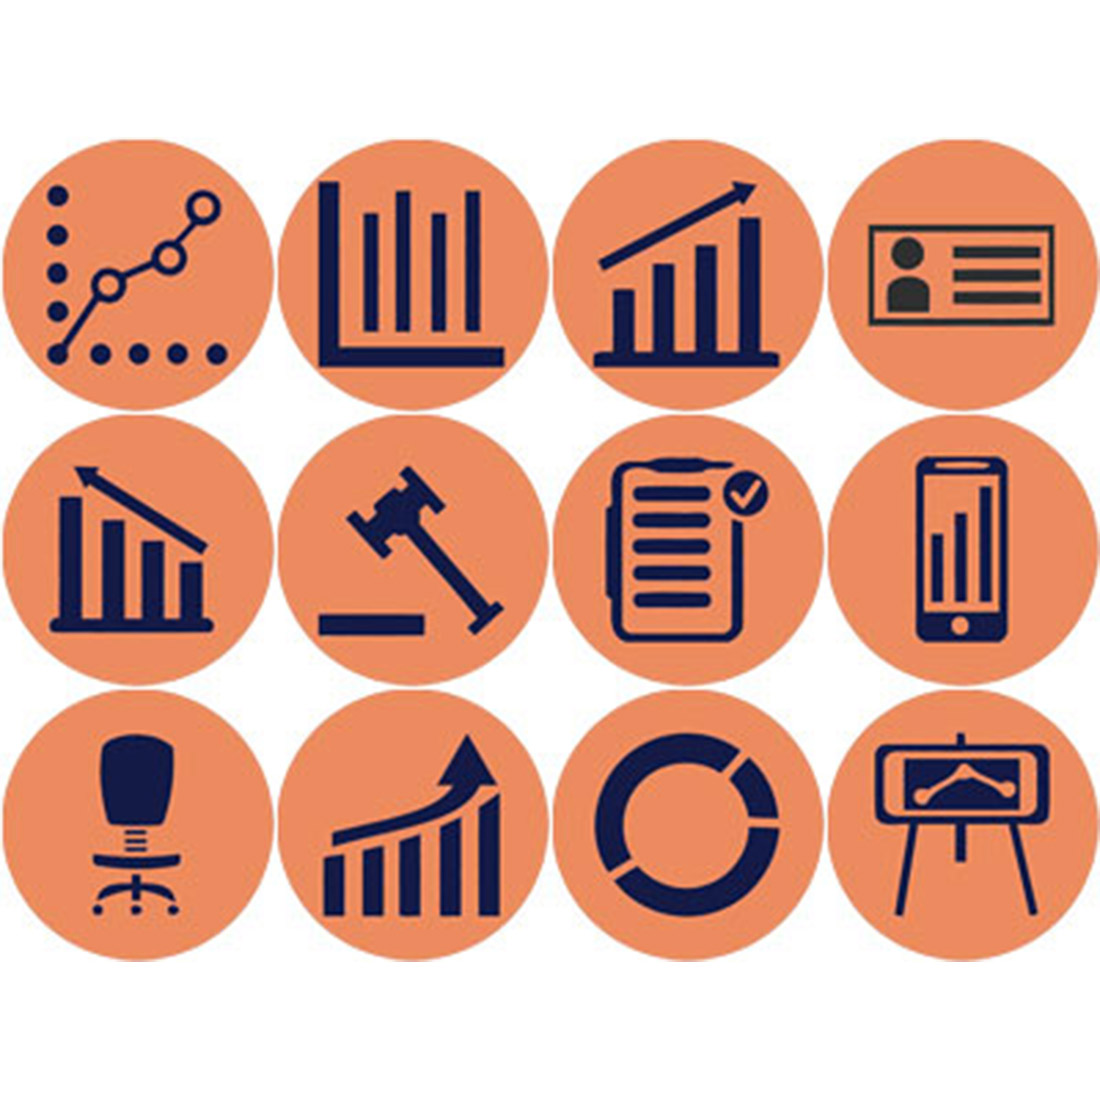 ORANGE AND NAVY BLUE BUSINESS ROUND ICONS cover image.